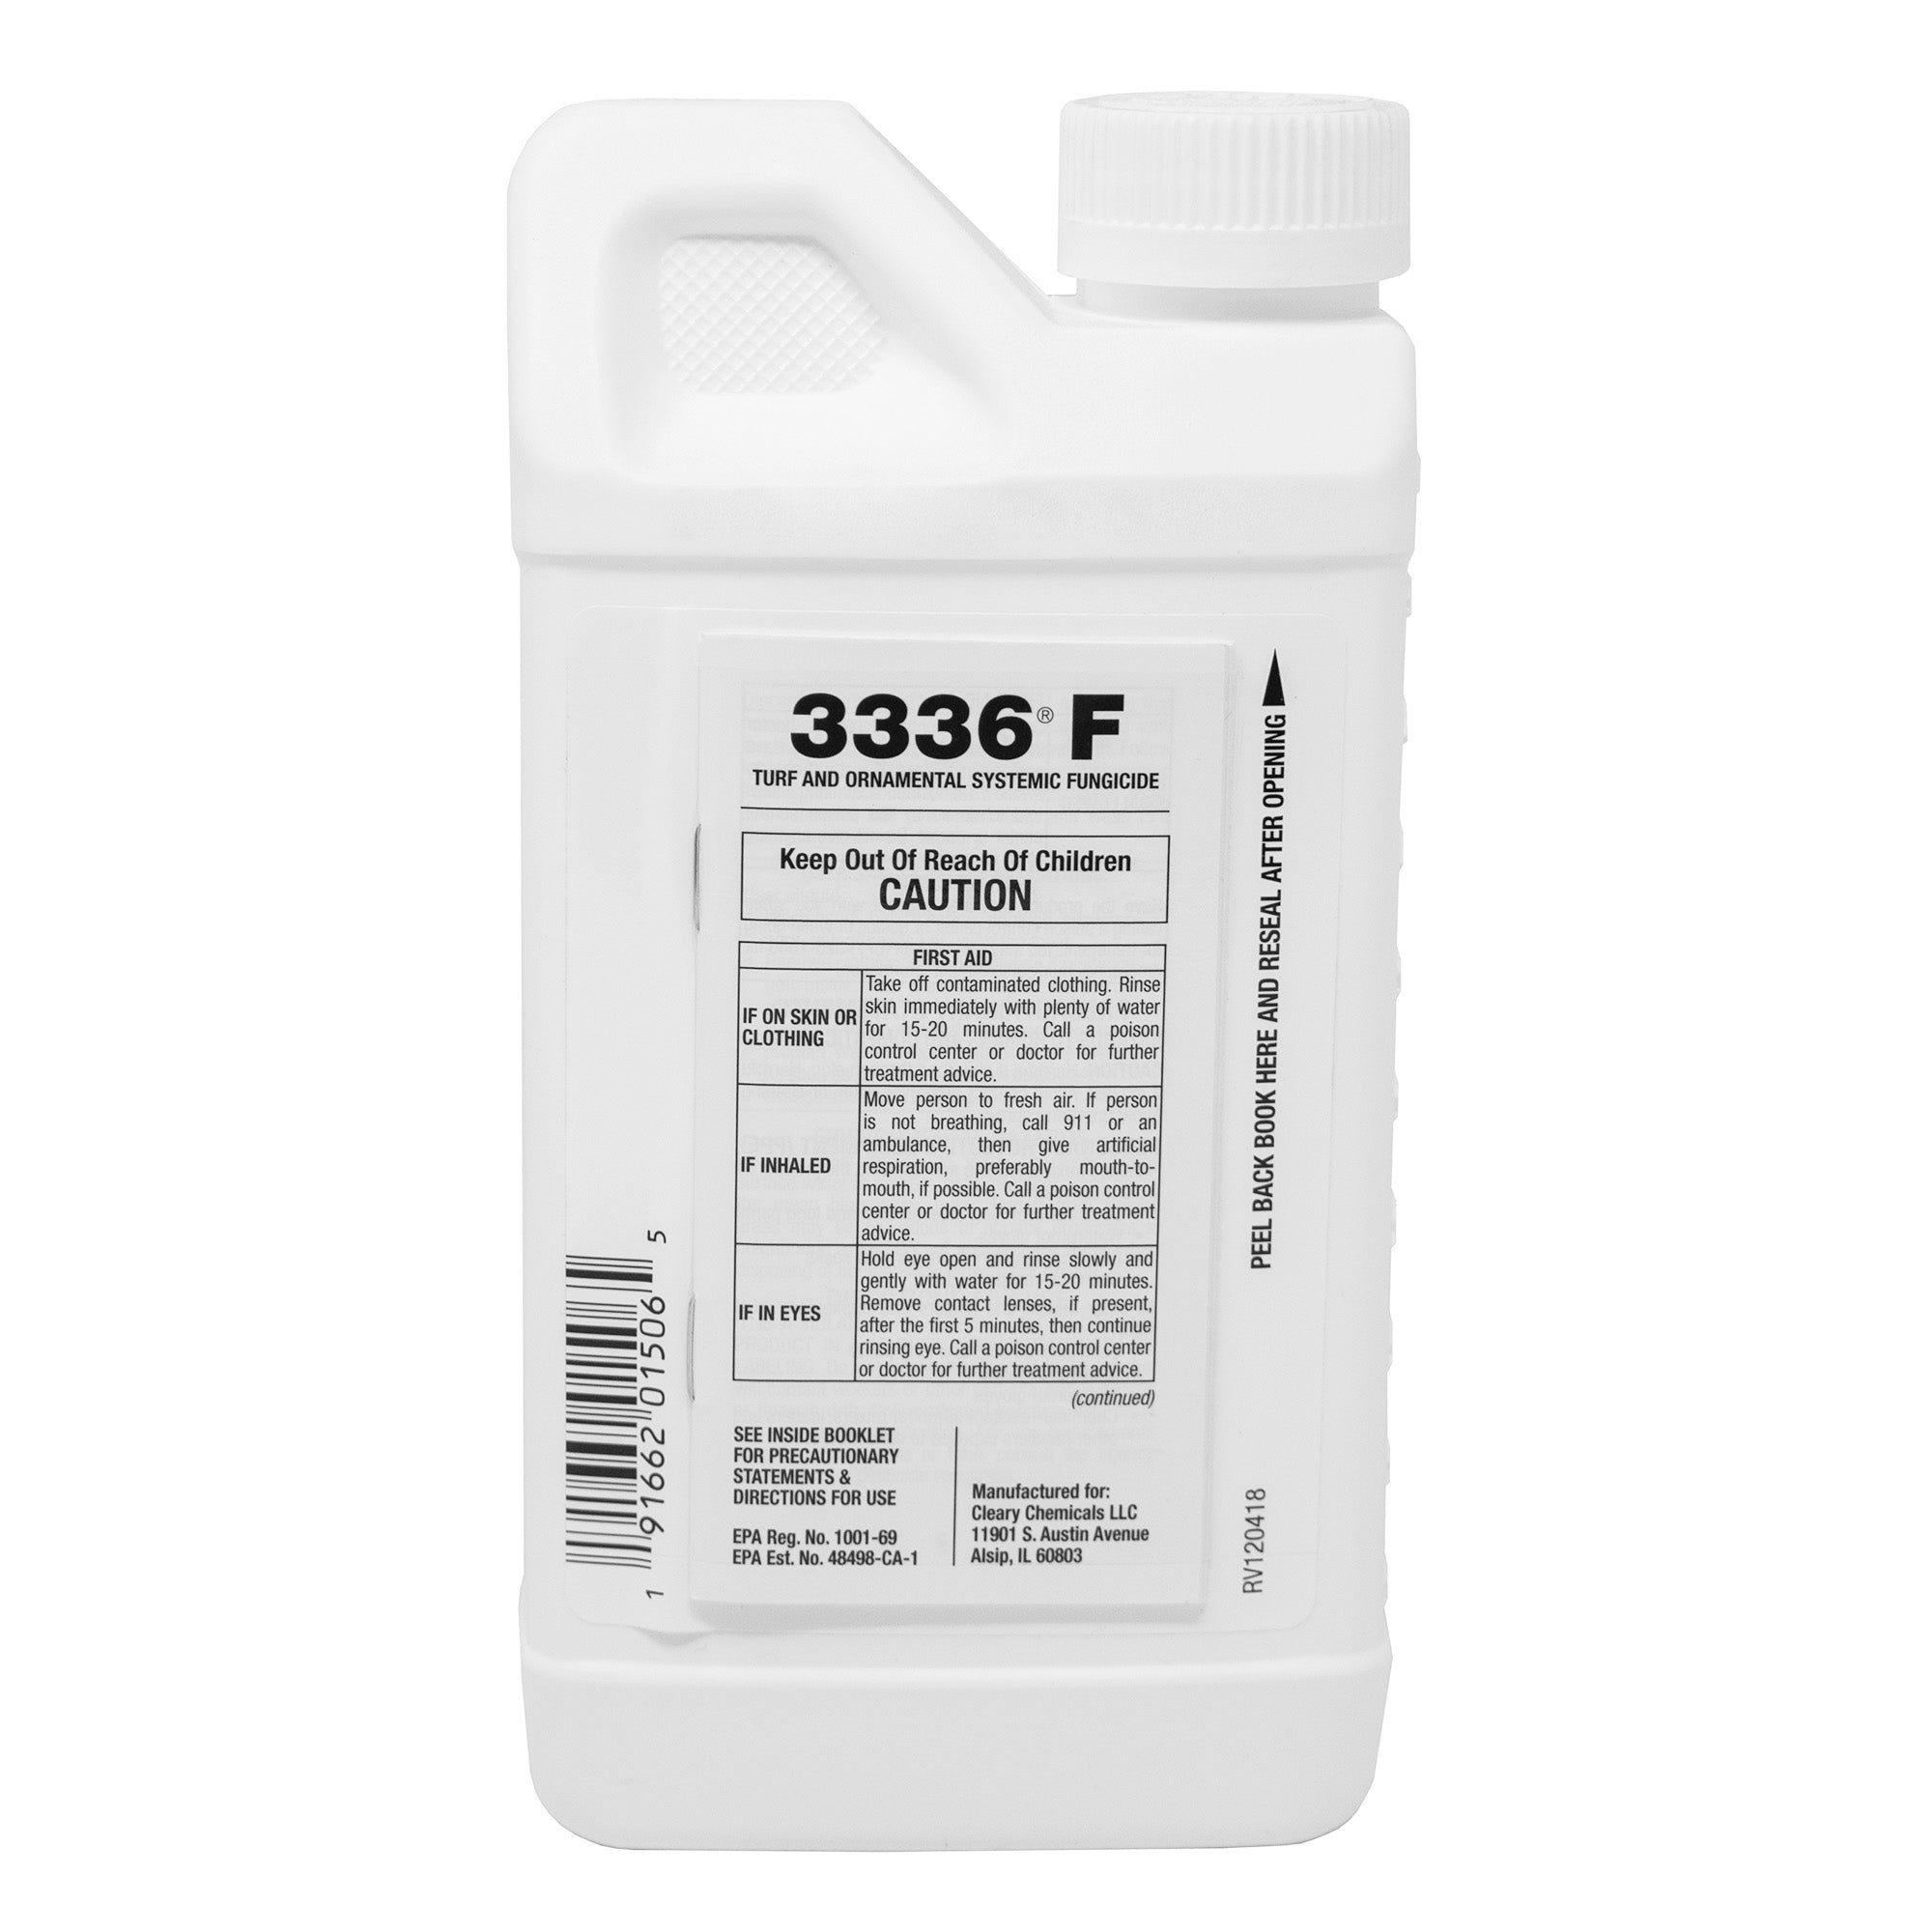 Nufarm Broad Spectrum Systemic Fungicide 3336F for Gardens and Turf, 1pt